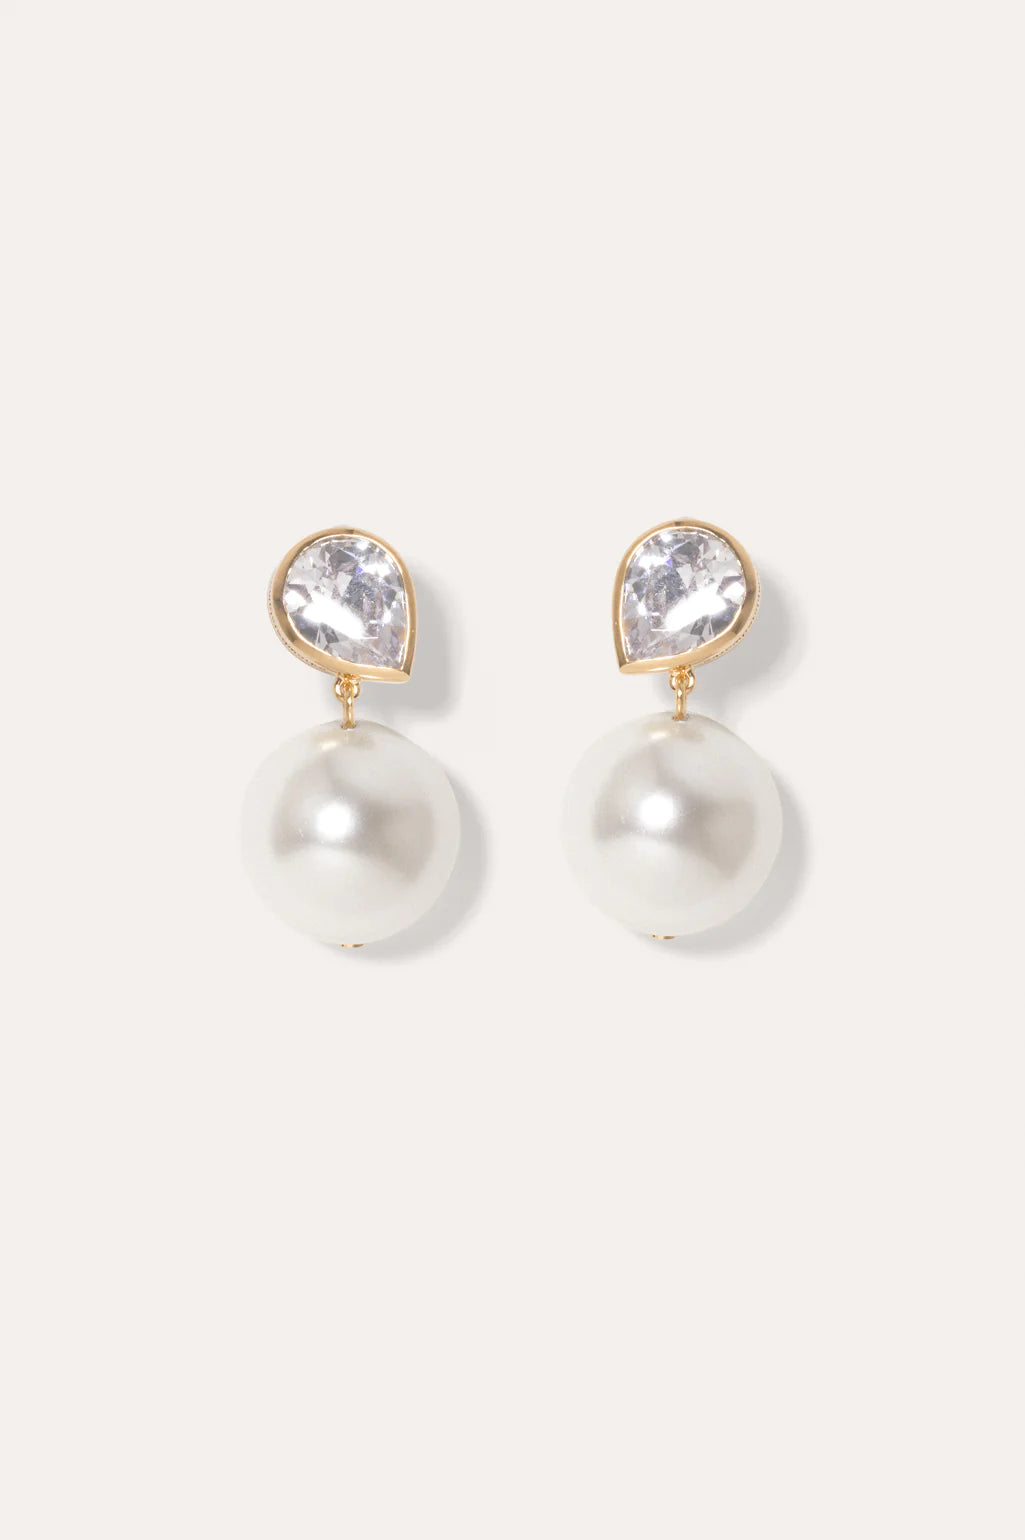 completedworks The Temporal Anomaly Pearl and Zirconia Gold Earrings